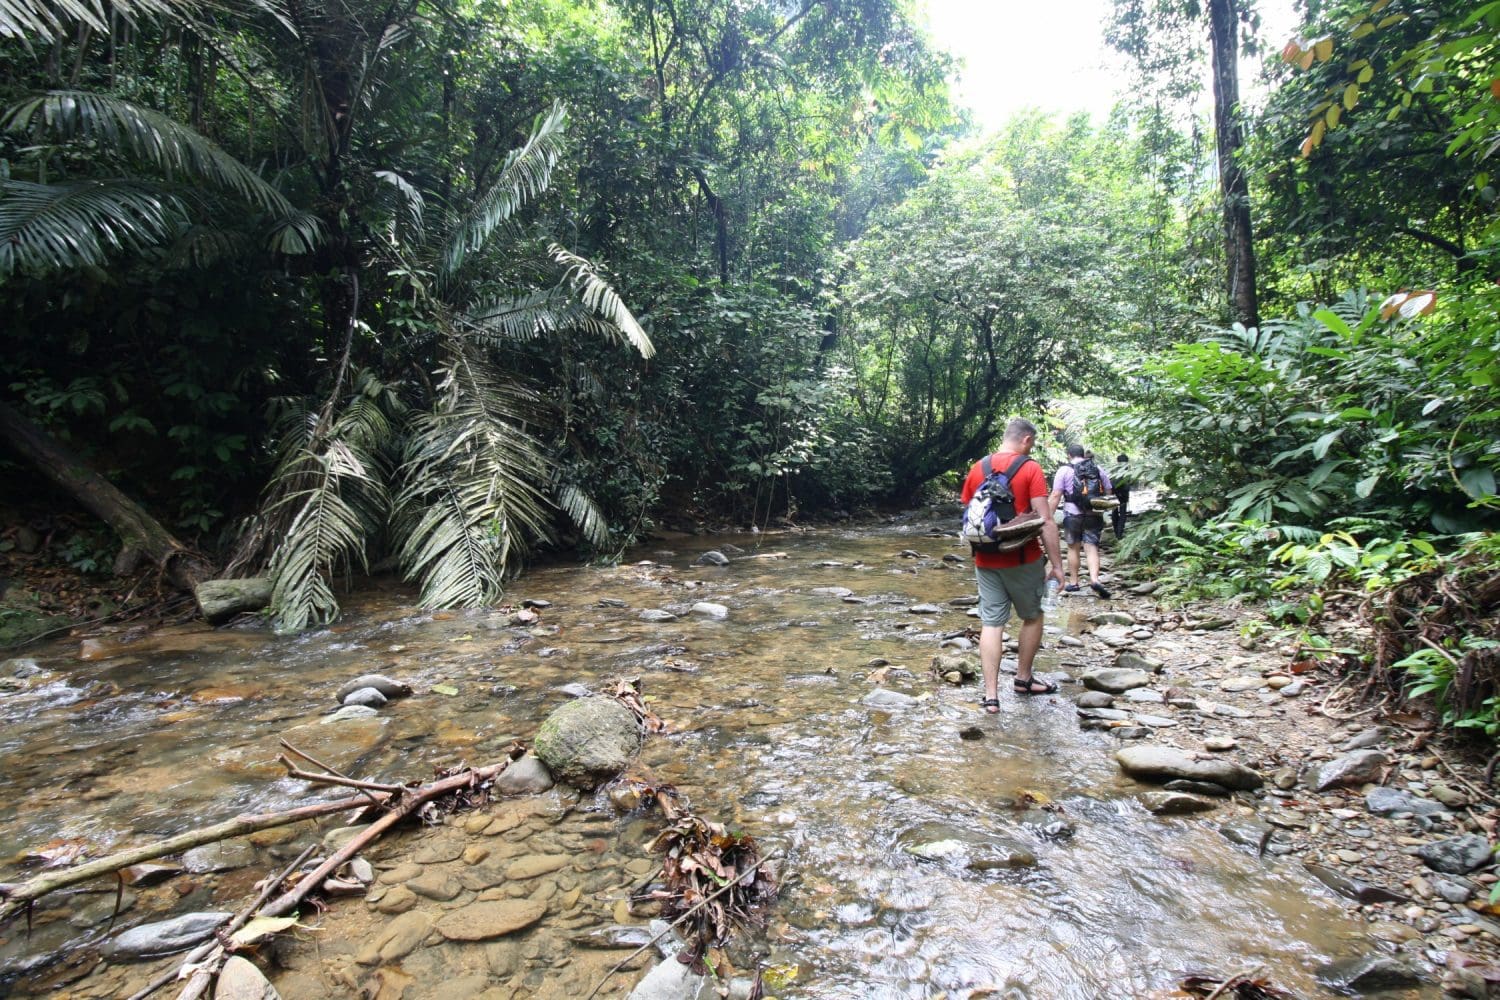 Mike walking up a shallow area of the river, Jungle trek Sumatra Indonesia